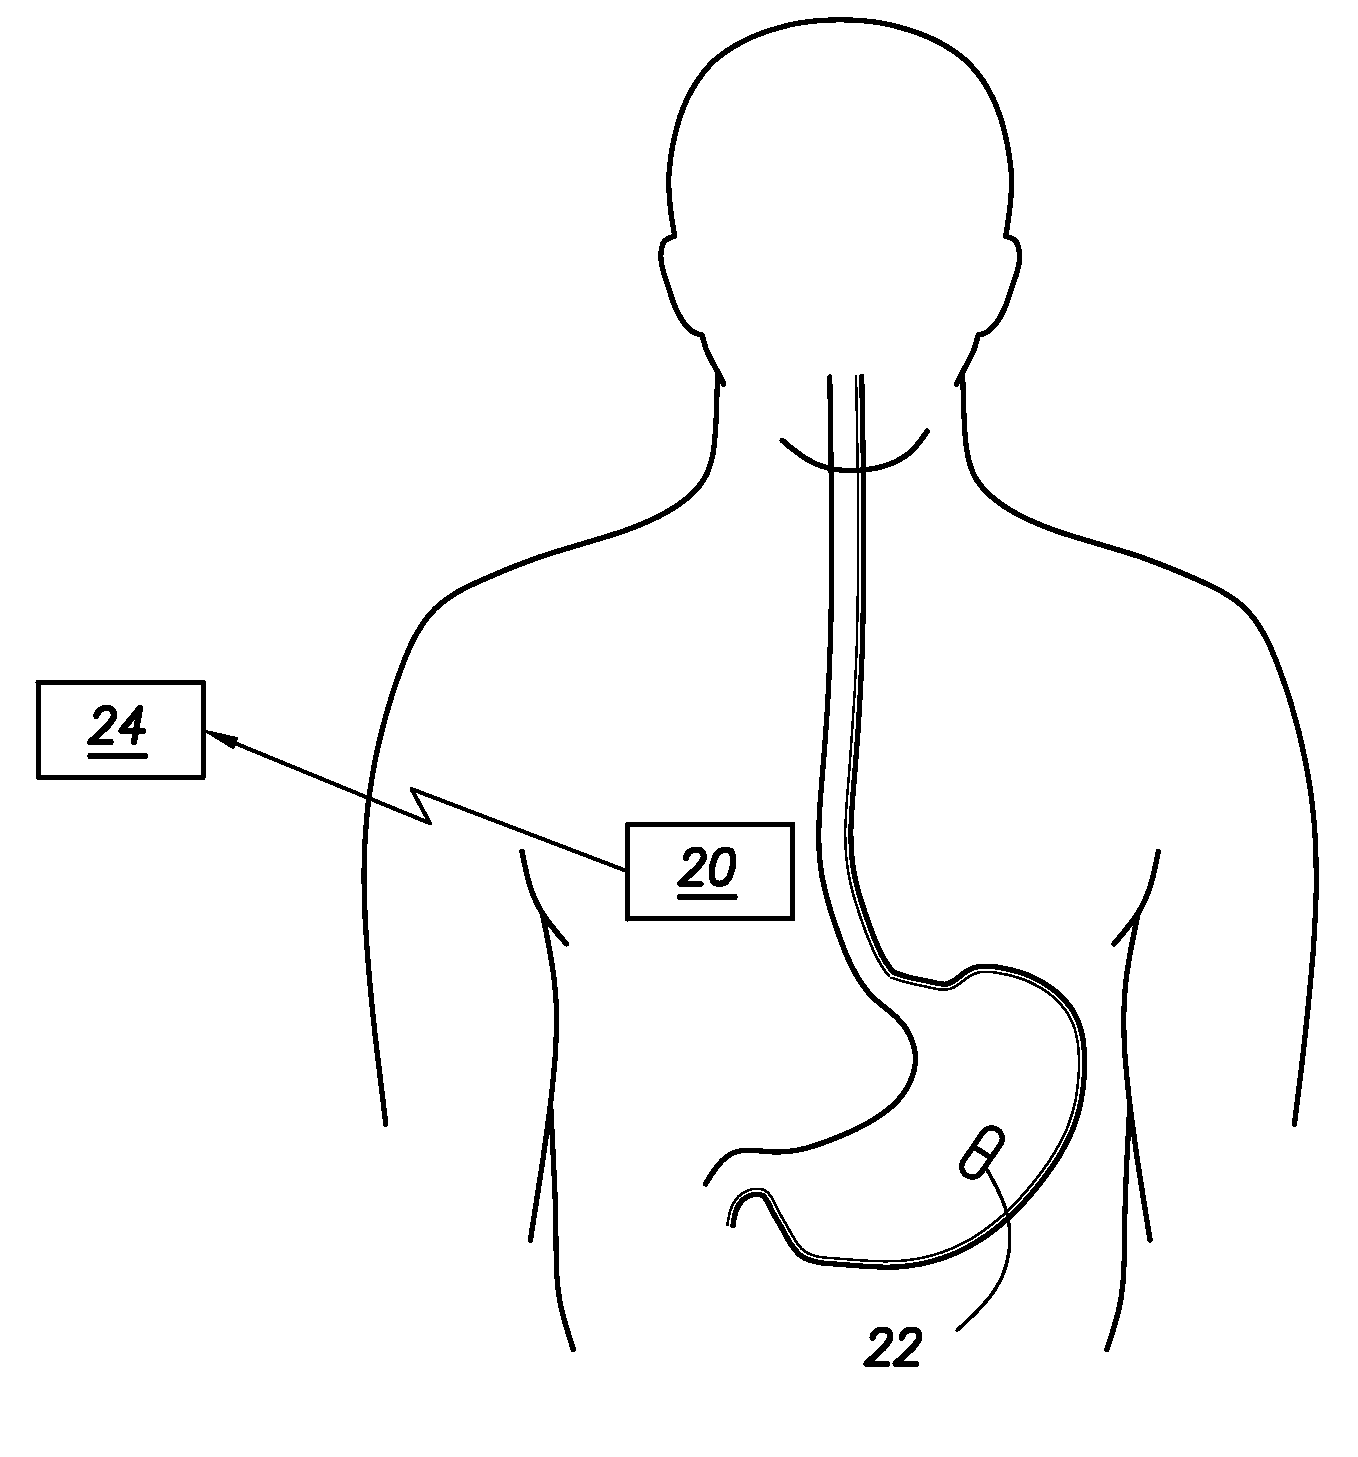 Evaluation of gastrointestinal function using portable electroviscerography systems and methods of using the same